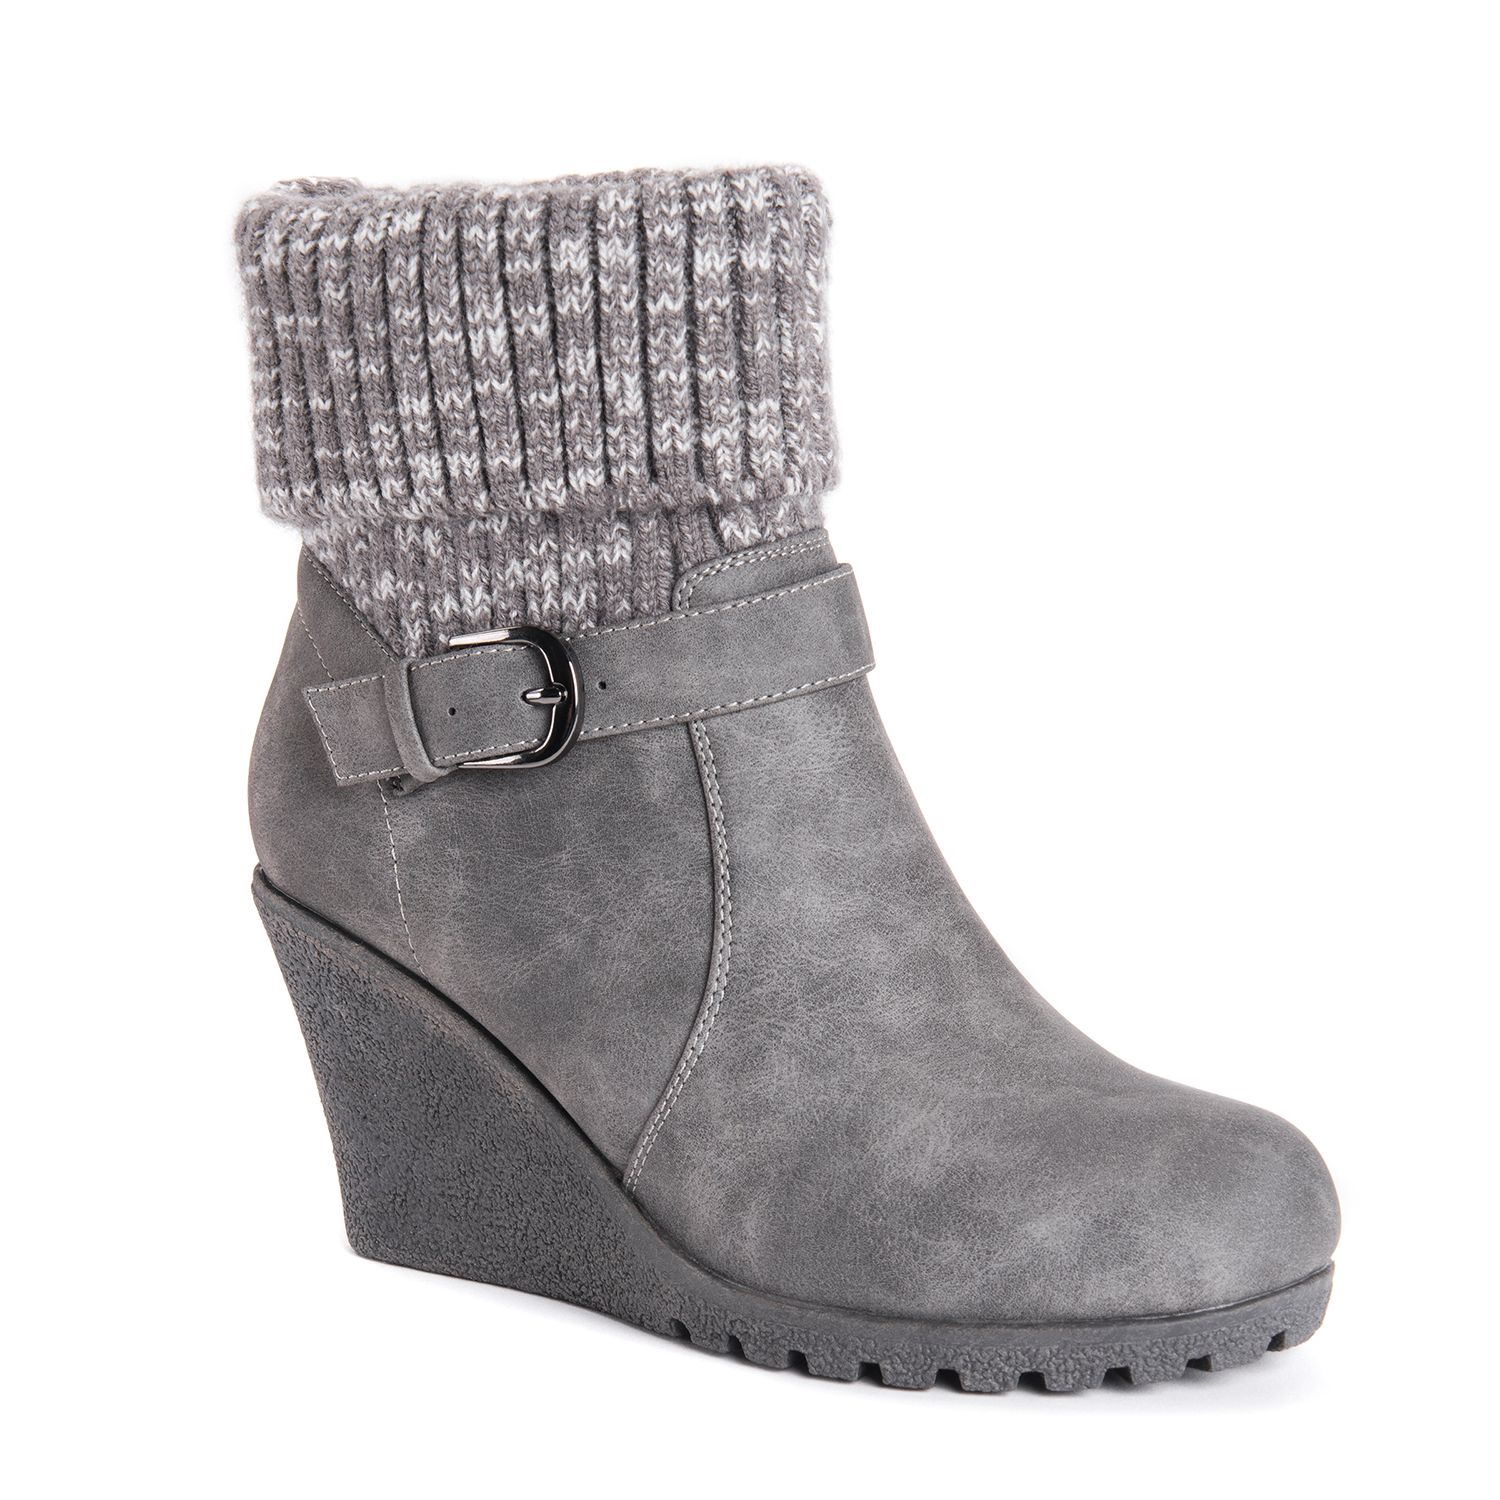 winter boots with wedge